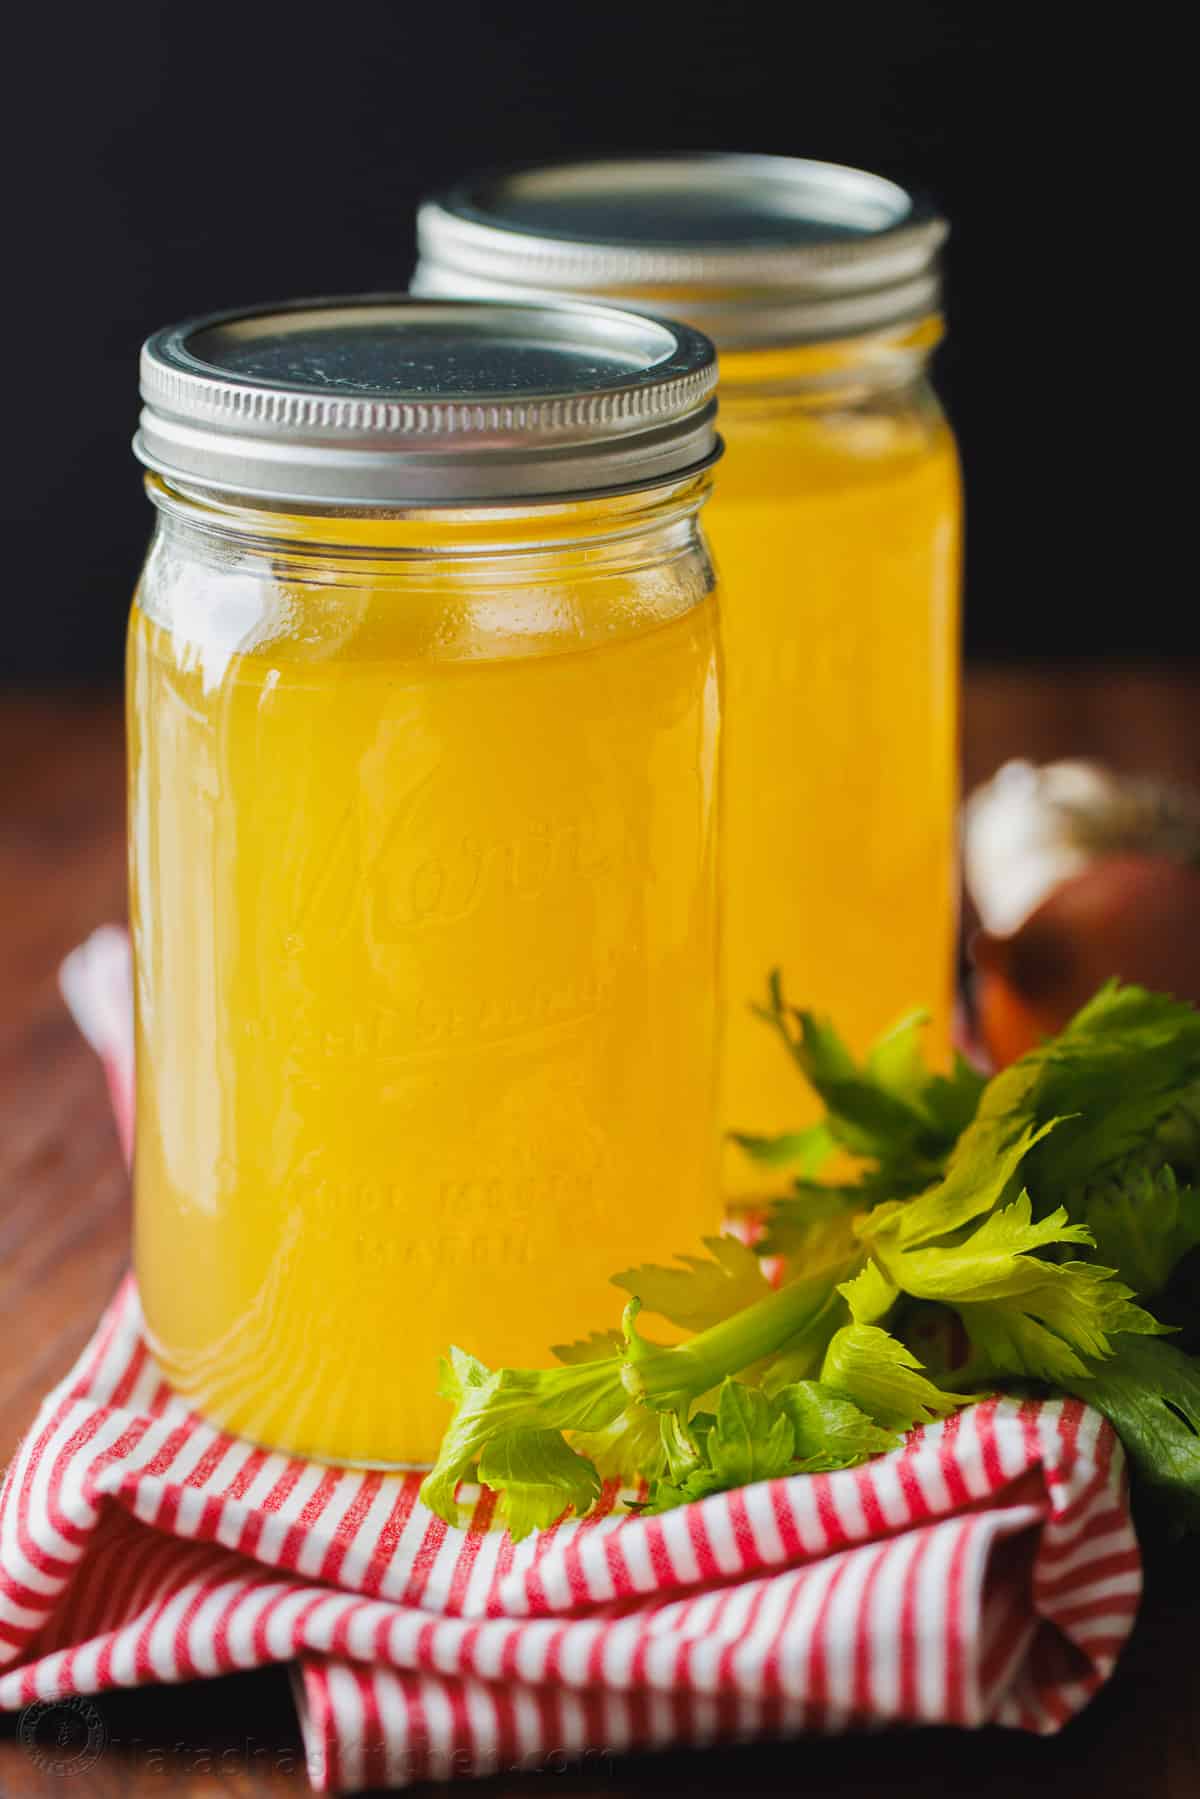 Turkey bone broth made from roasted Thanksgiving turkey and stored in glass jars